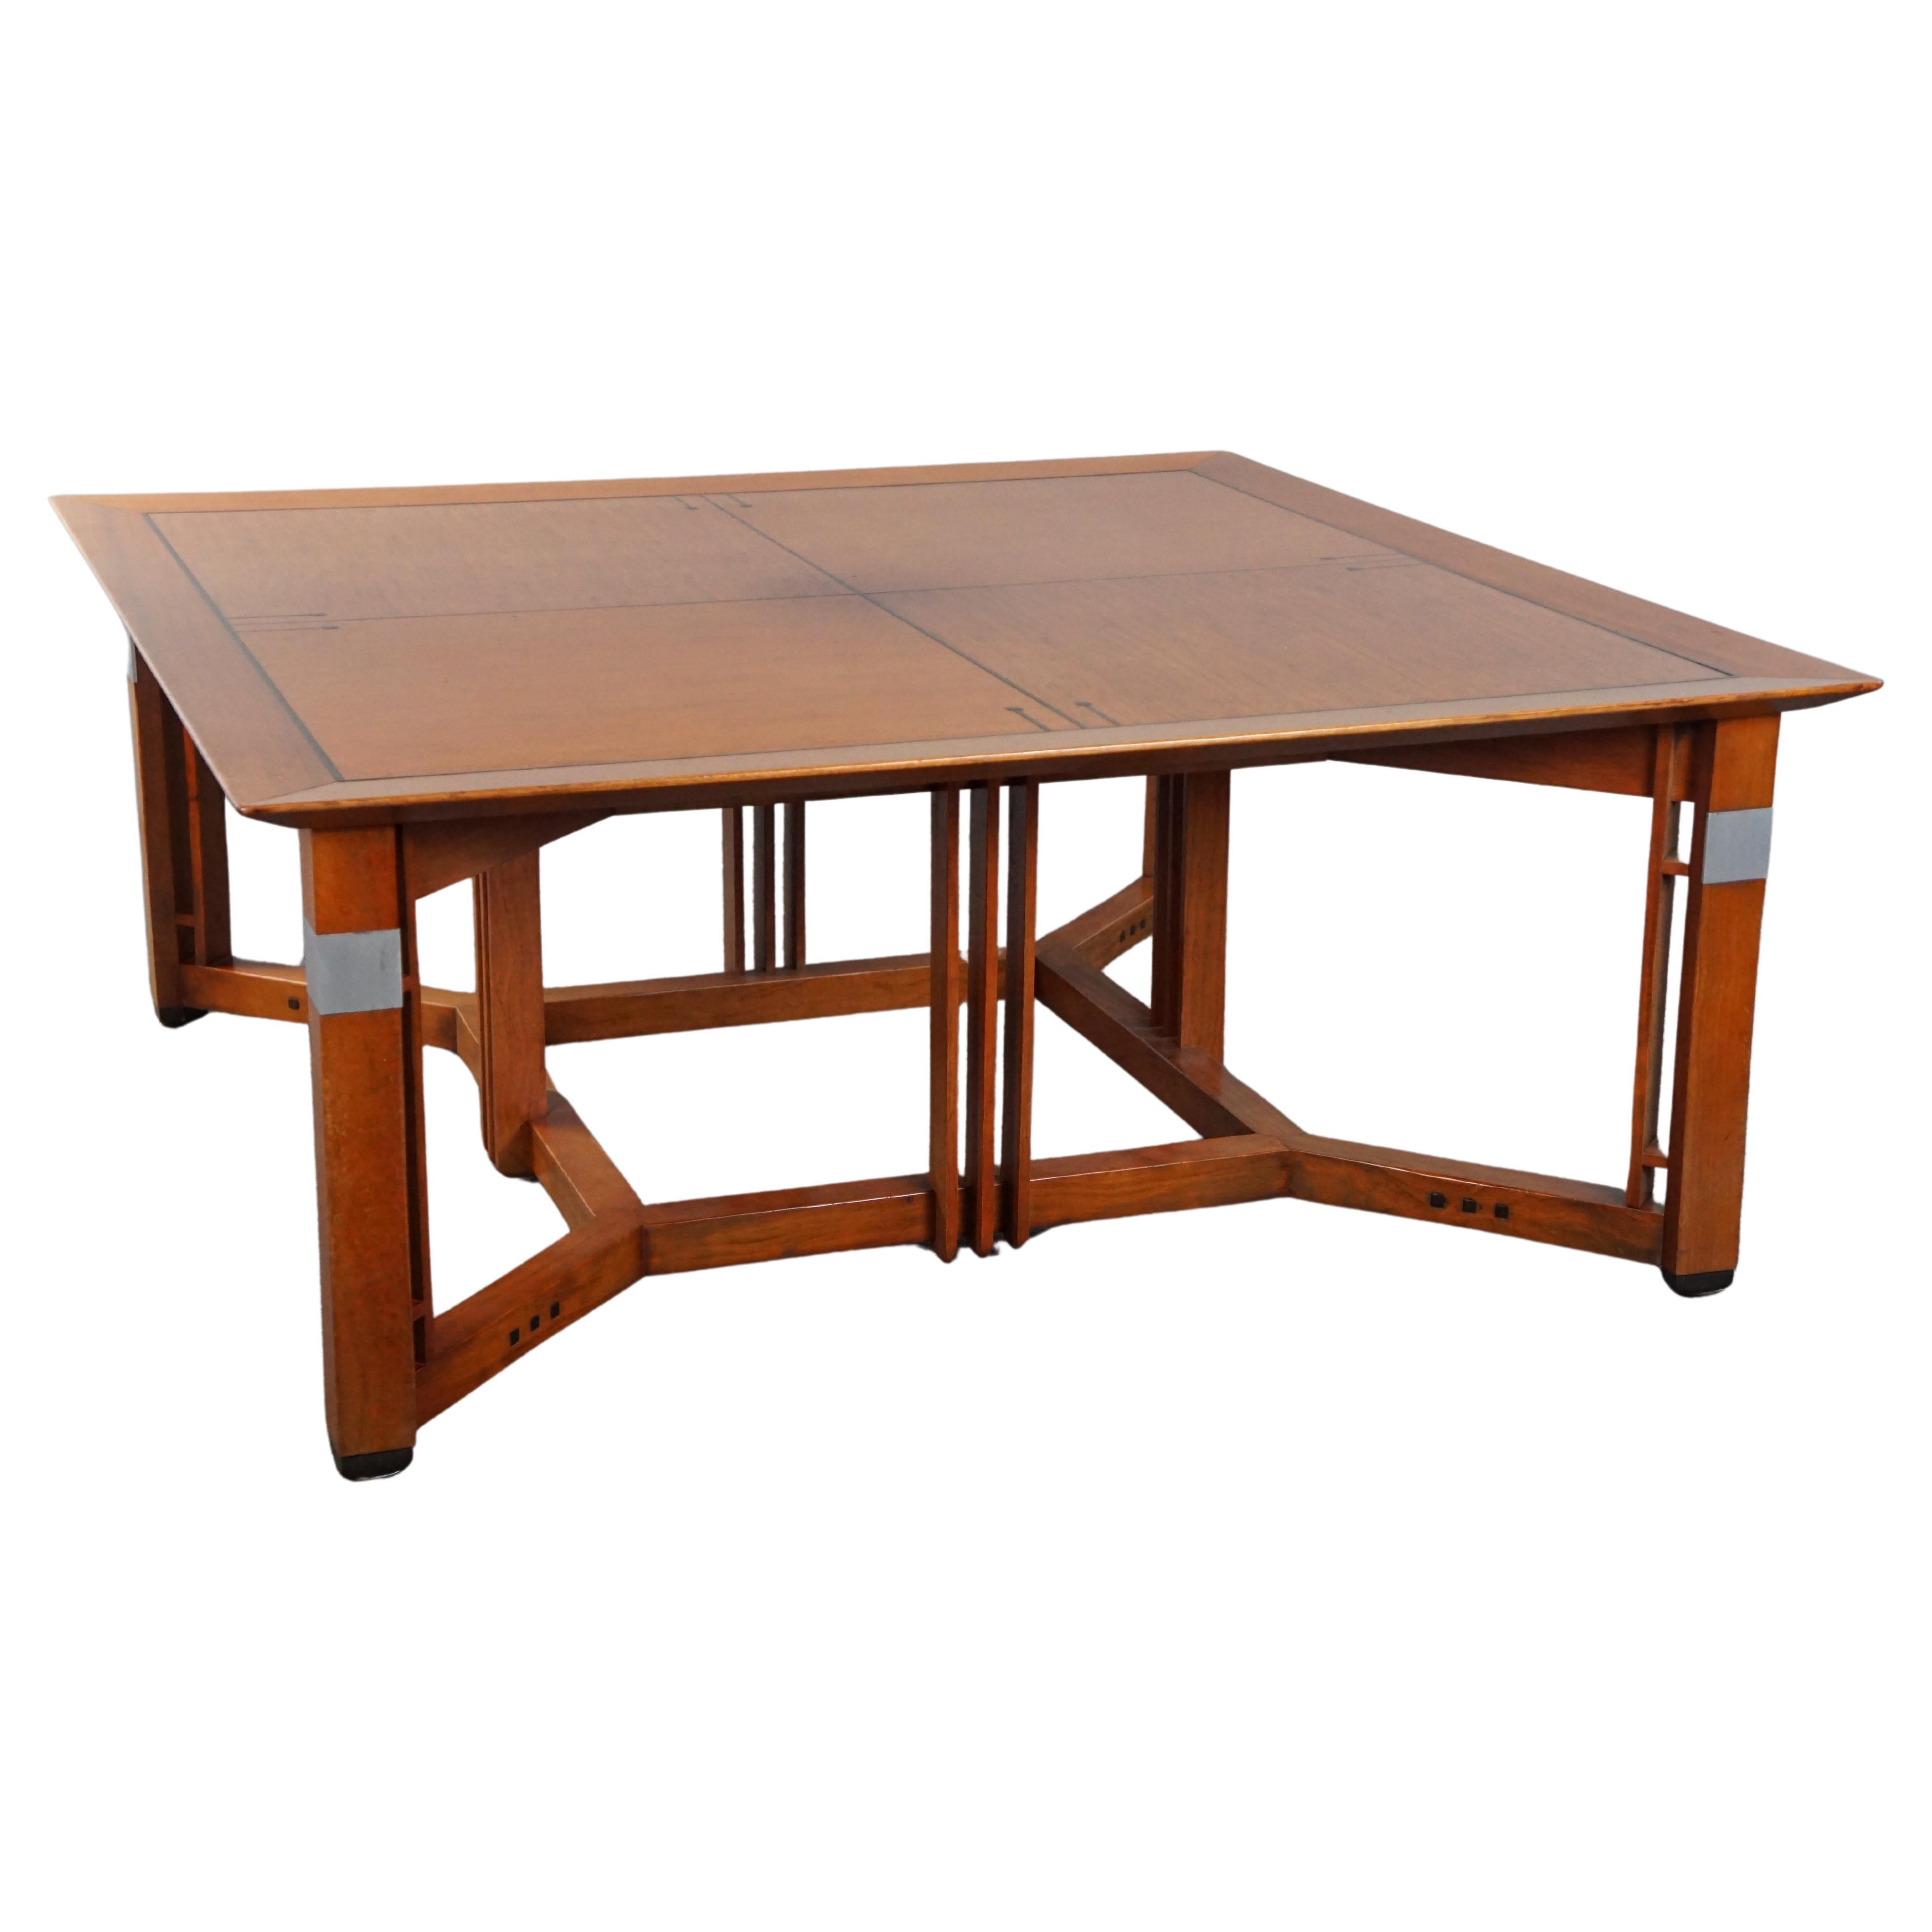 Large square coffee table from Schuitema's Decoforma series. For Sale